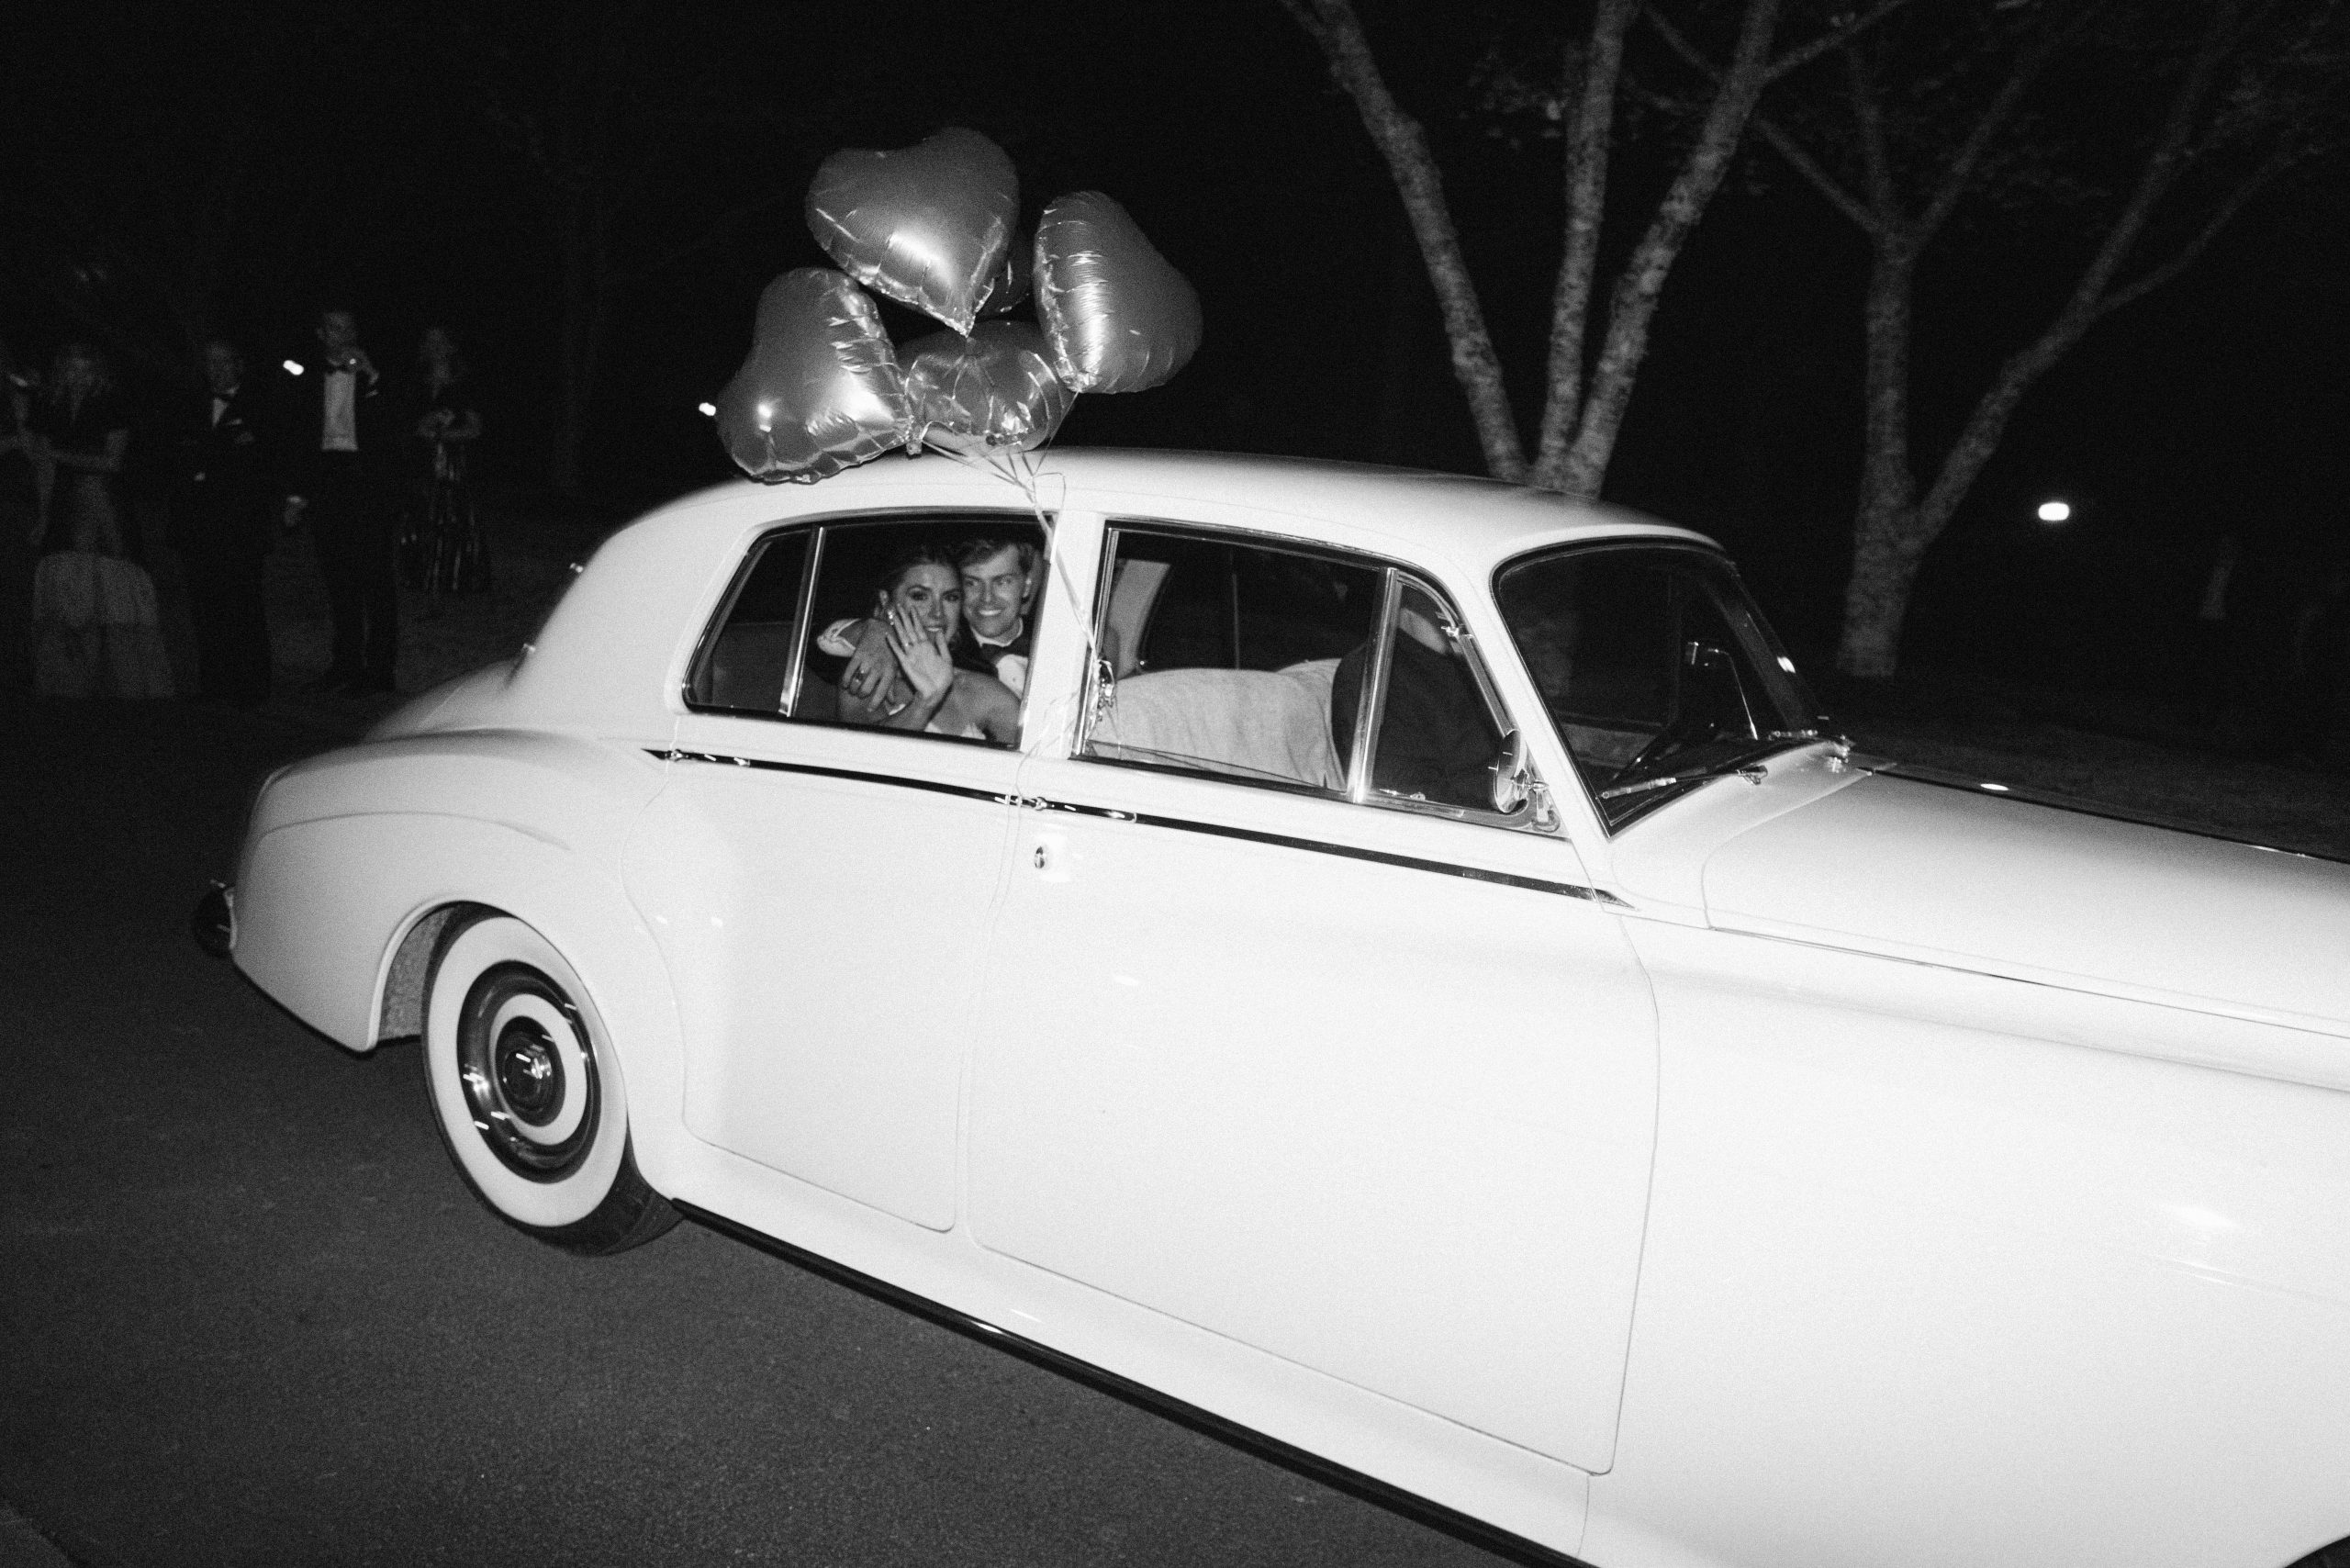  Sutton and Robert left the reception in a white vintage Rolls Royce festooned with red heart shaped balloons, full steam ahead to St. Bart’s for their honeymoon! 